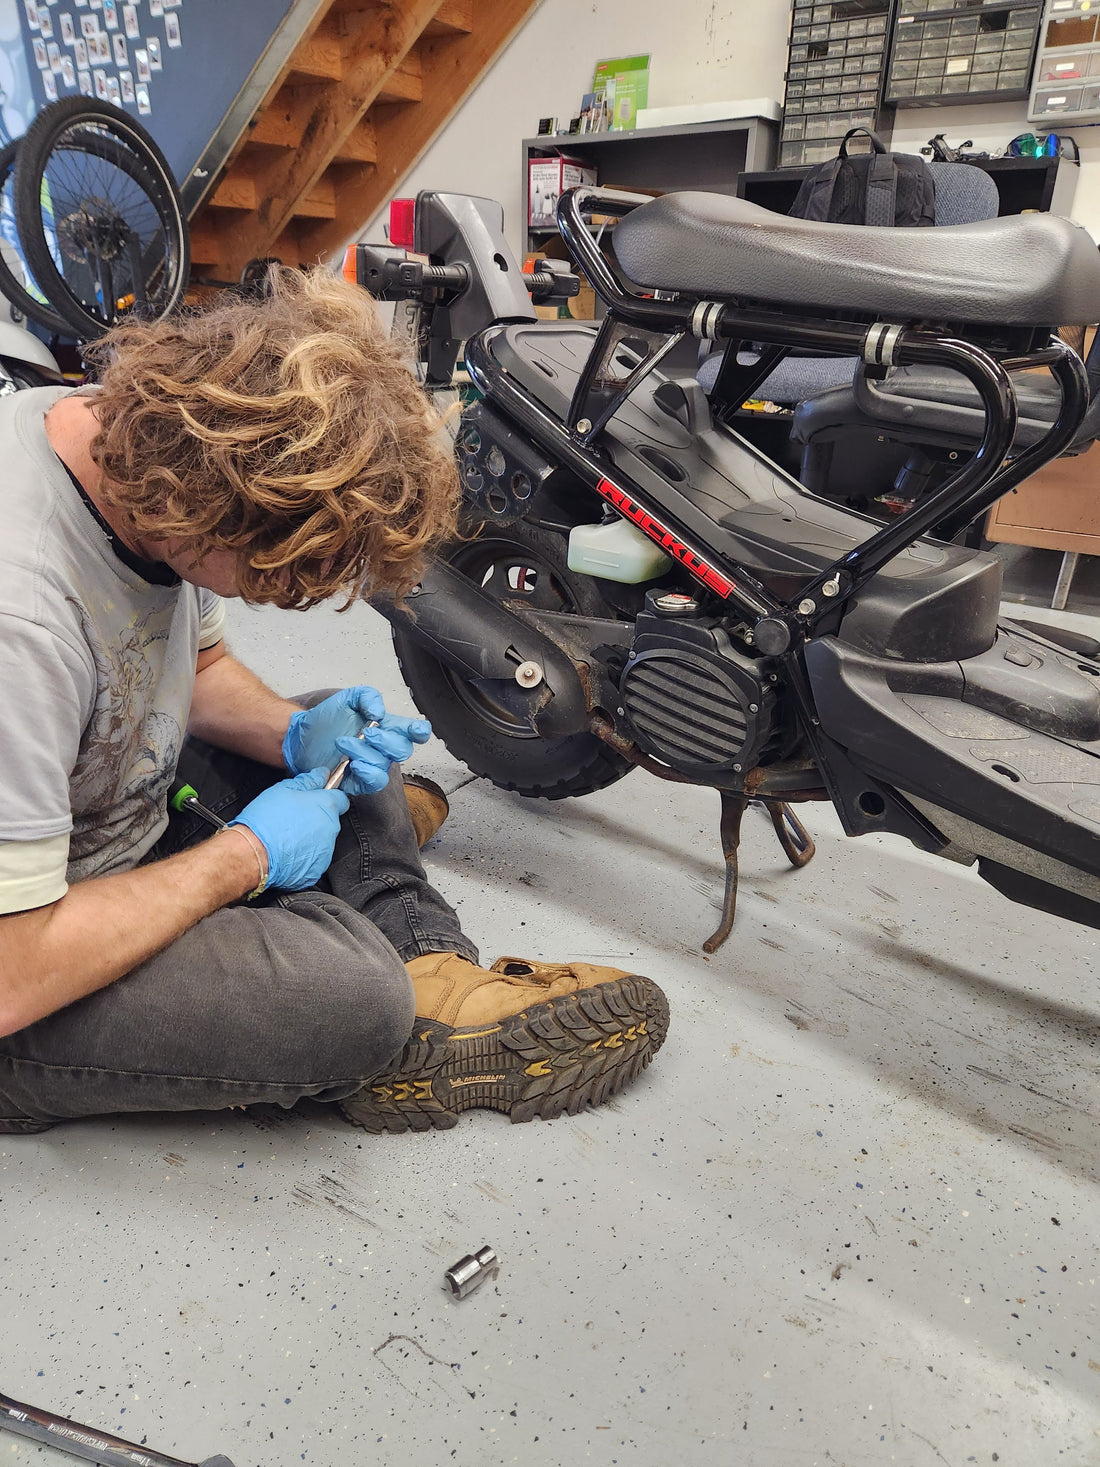 A Winter Tune-Up Tale: Getting Kyle’s Honda Ruckus Ready for the Season